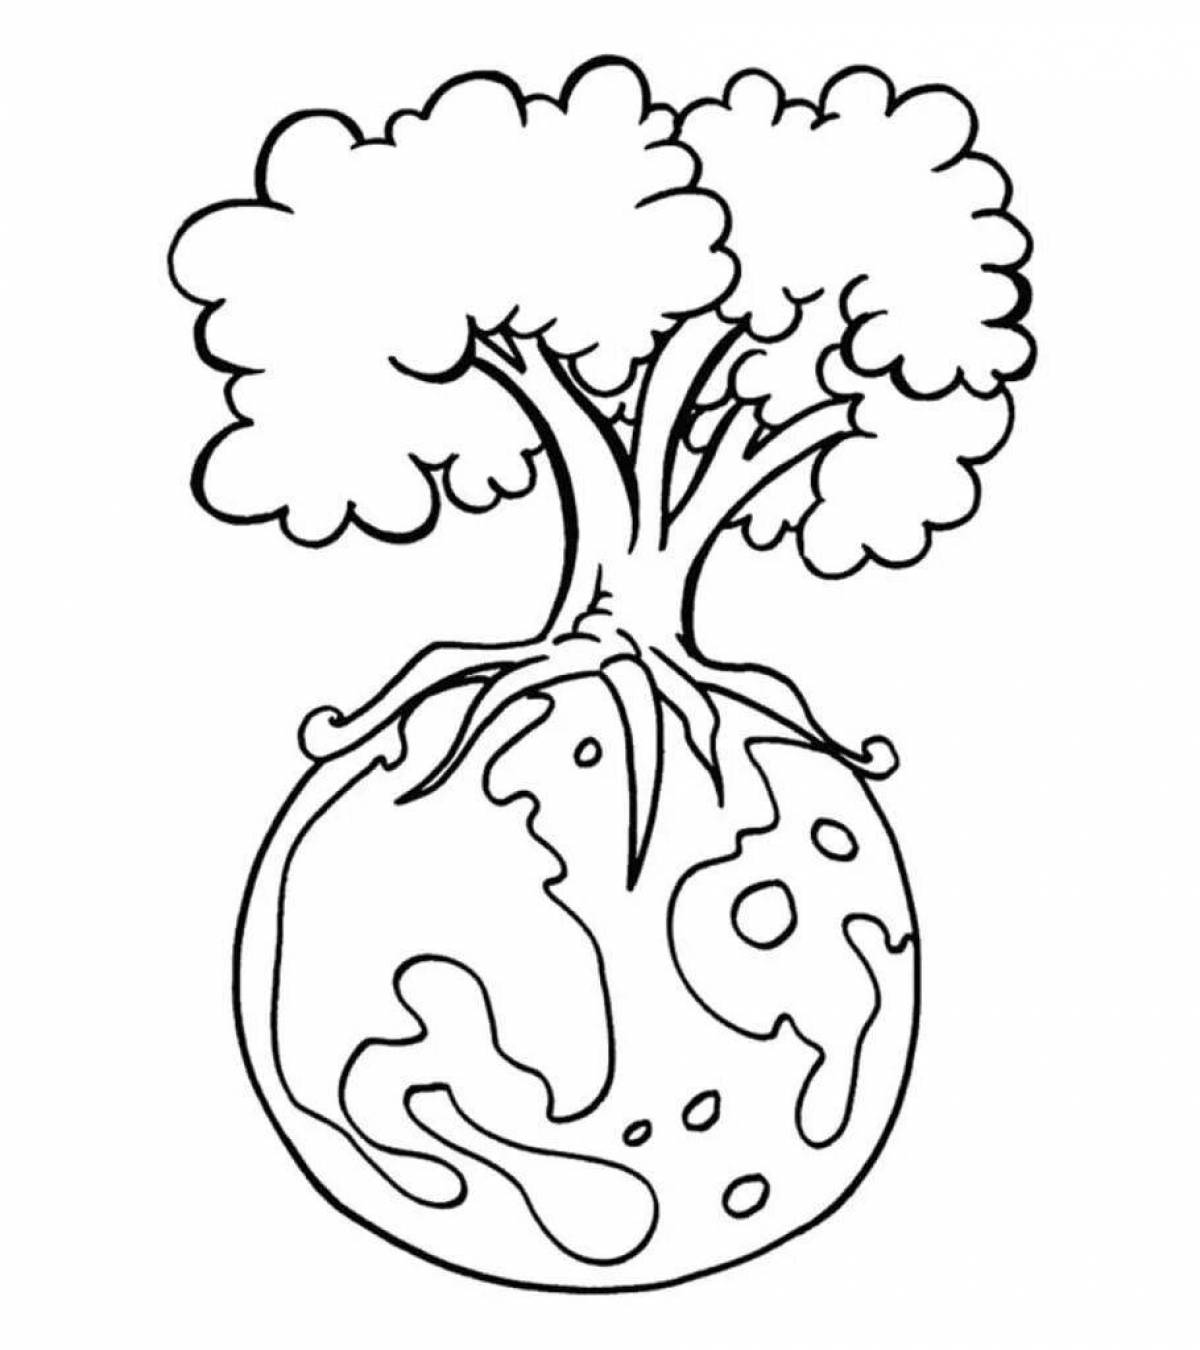 Serene save nature coloring page